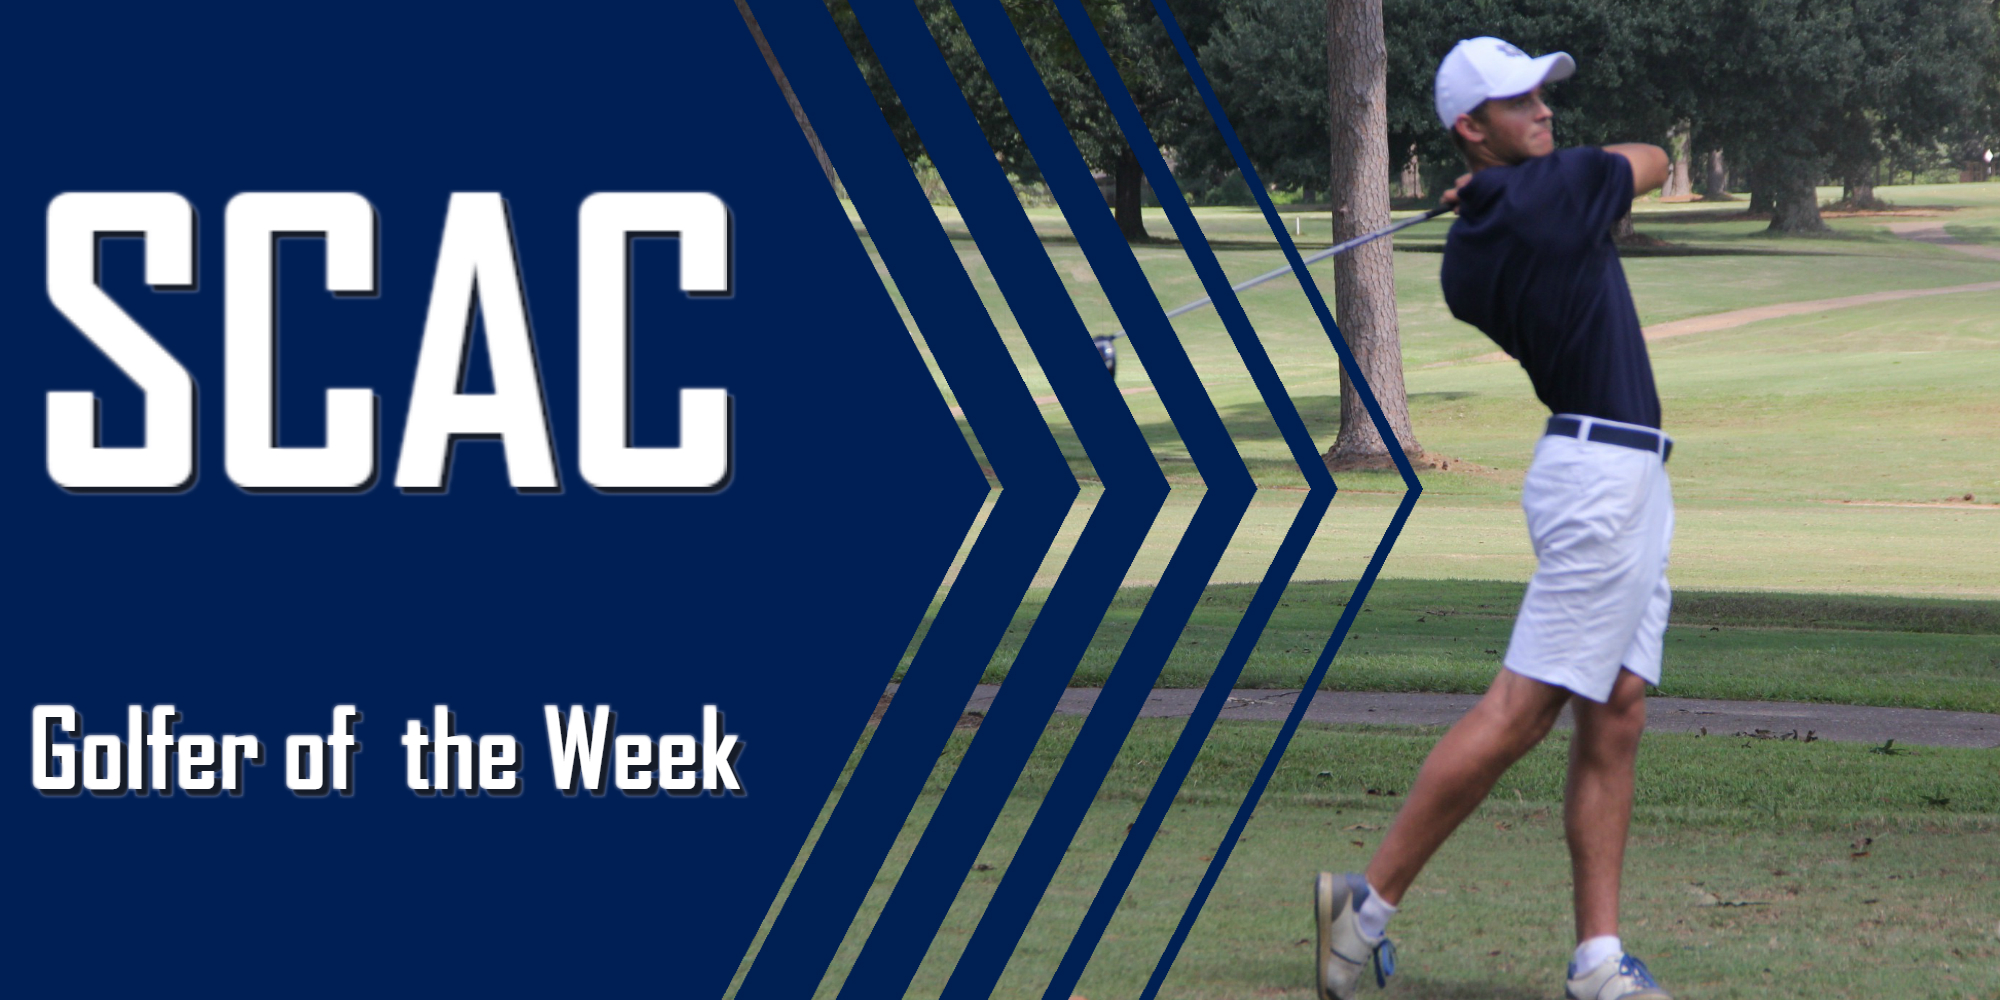 Schuberg tabbed SCAC Golfer of the Week for the 1st time this Spring (3rd Overall 2016-17)